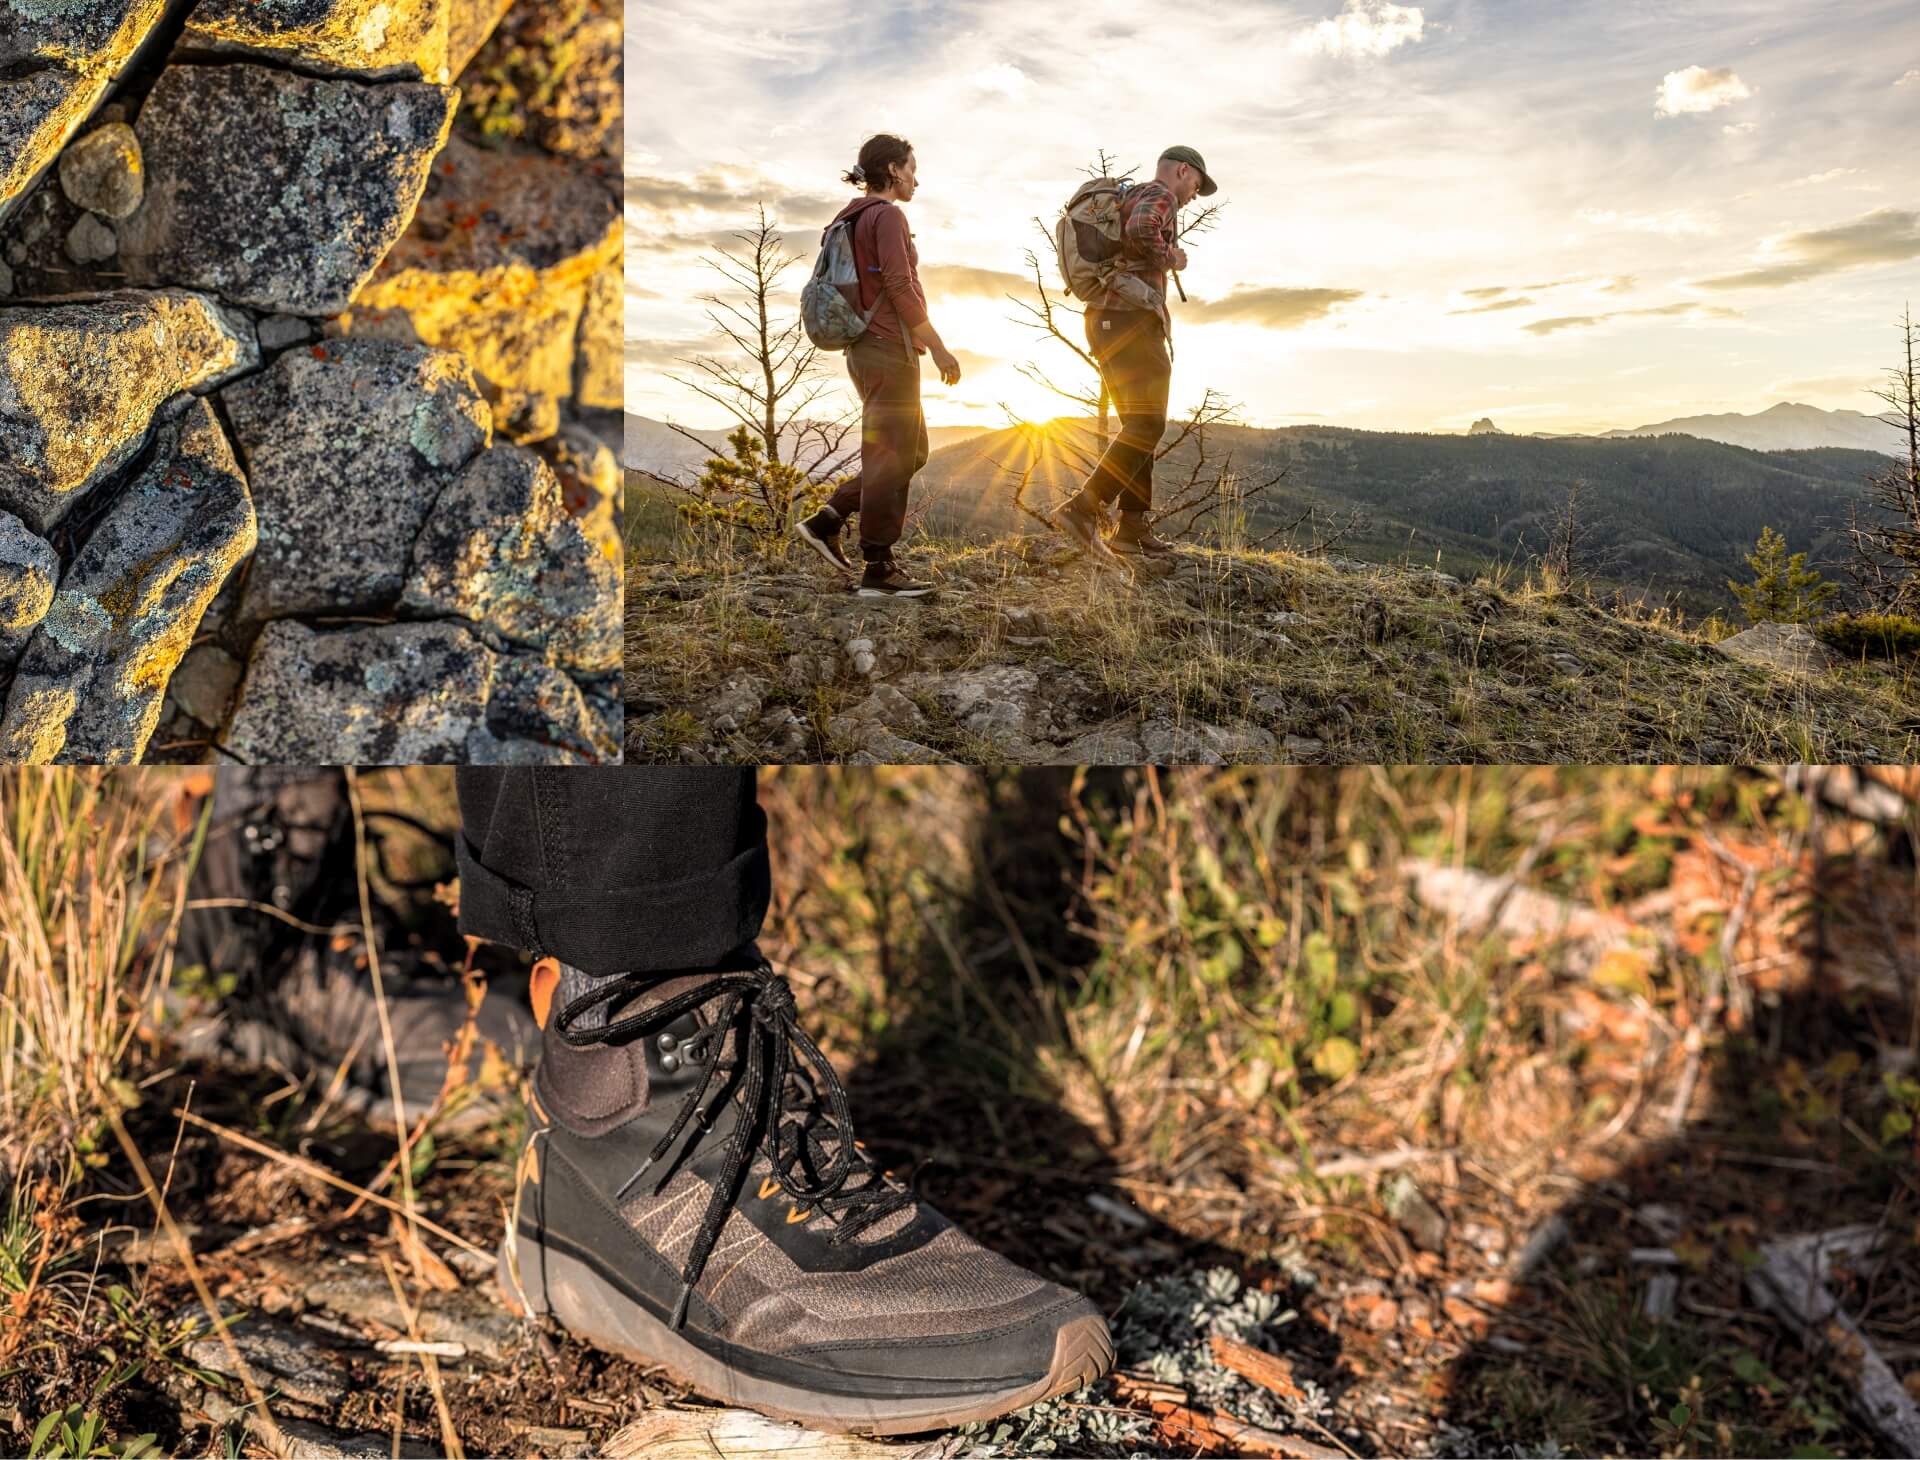 The Forsake Men's Cascade Peak Mid in brown shown on a mountain top.